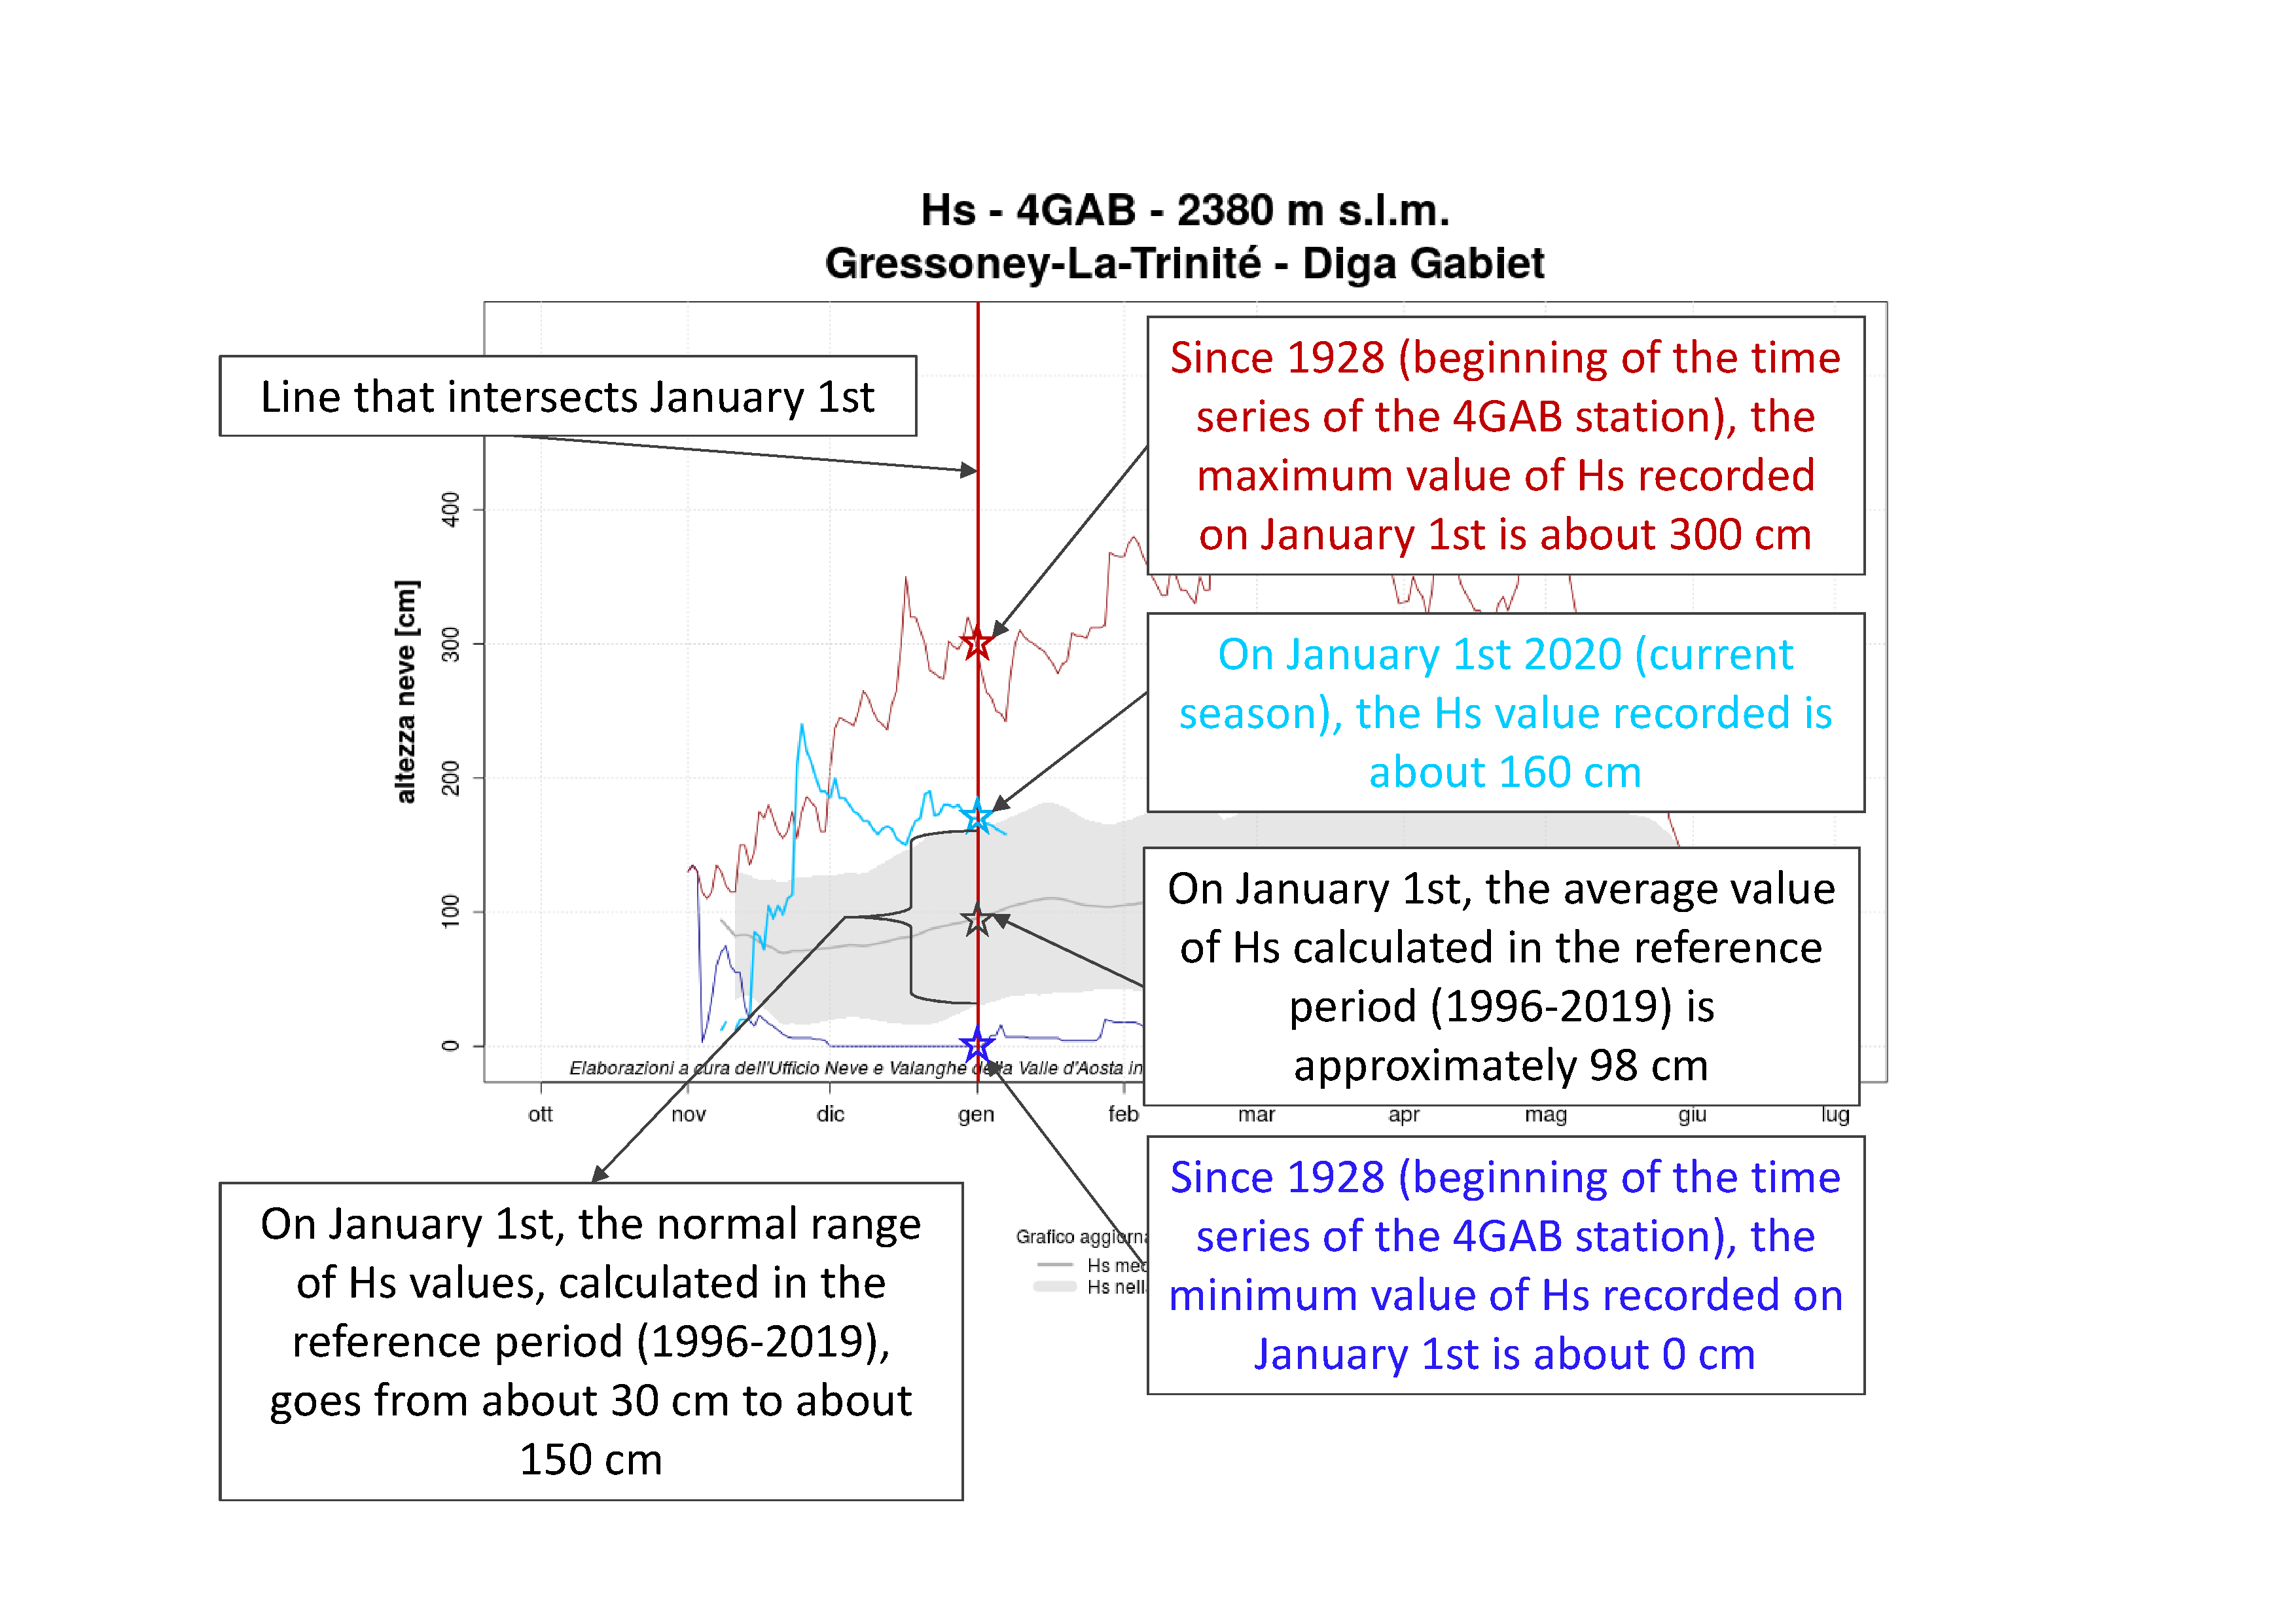 Figure 2: some information that can be obtained from a Snow Graph - Historical Series, by analysing a specific day, in the example January 1st.